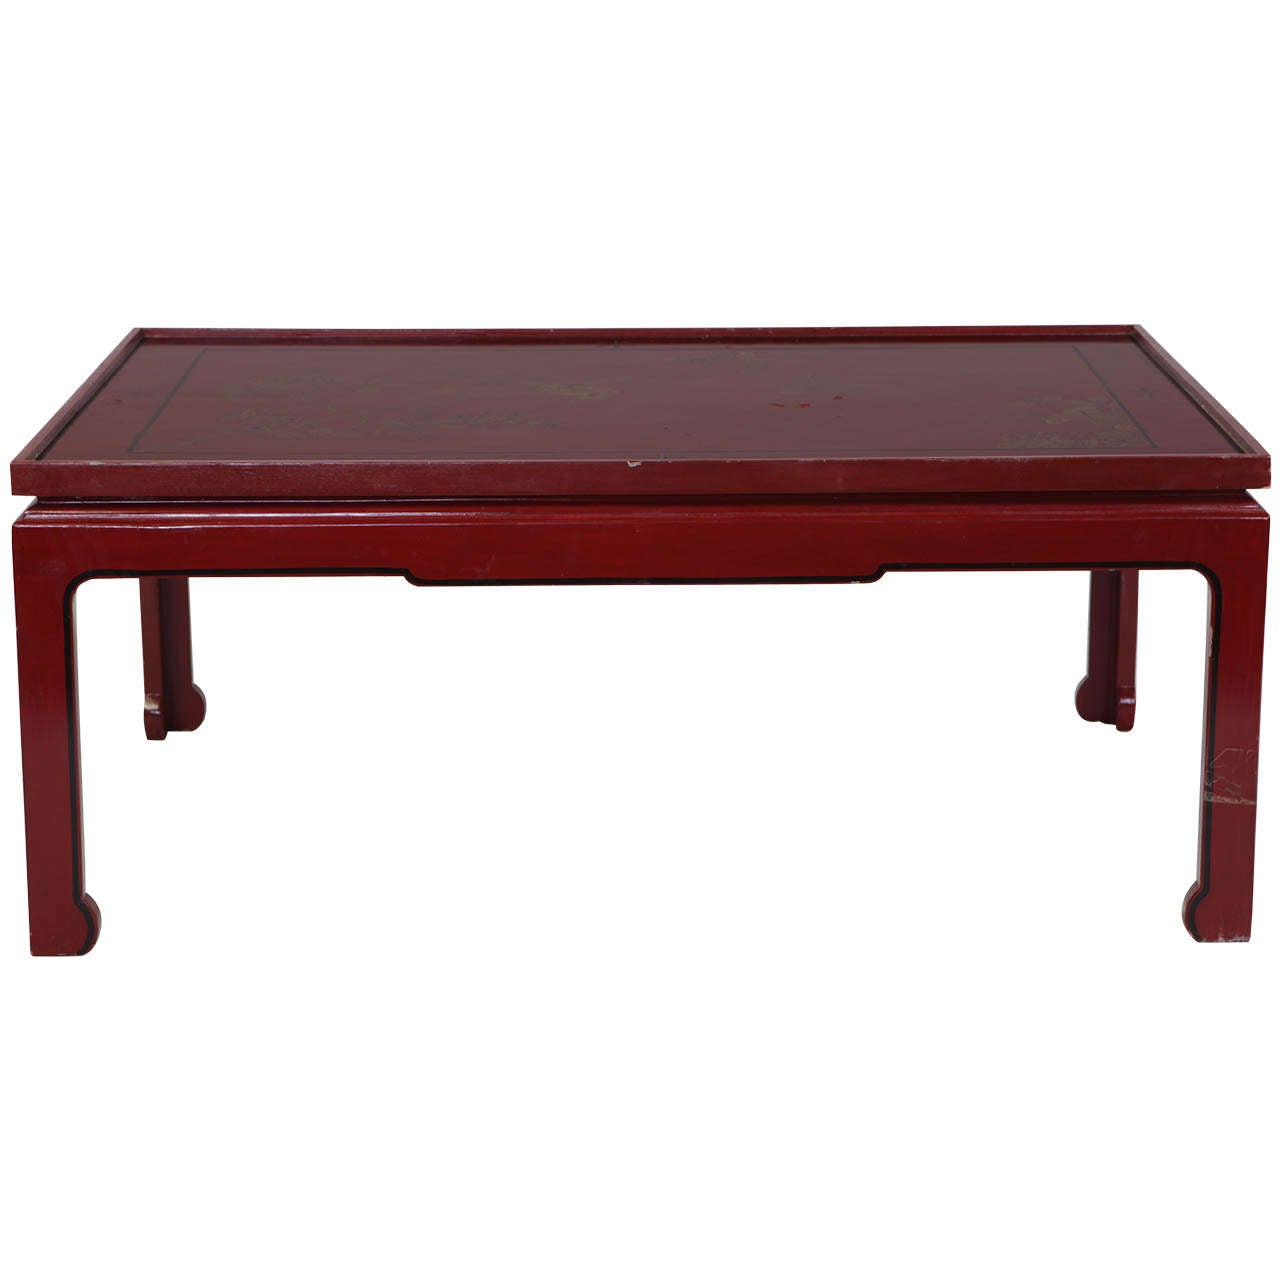 20th Century Square Red Lacquered Coffee Table